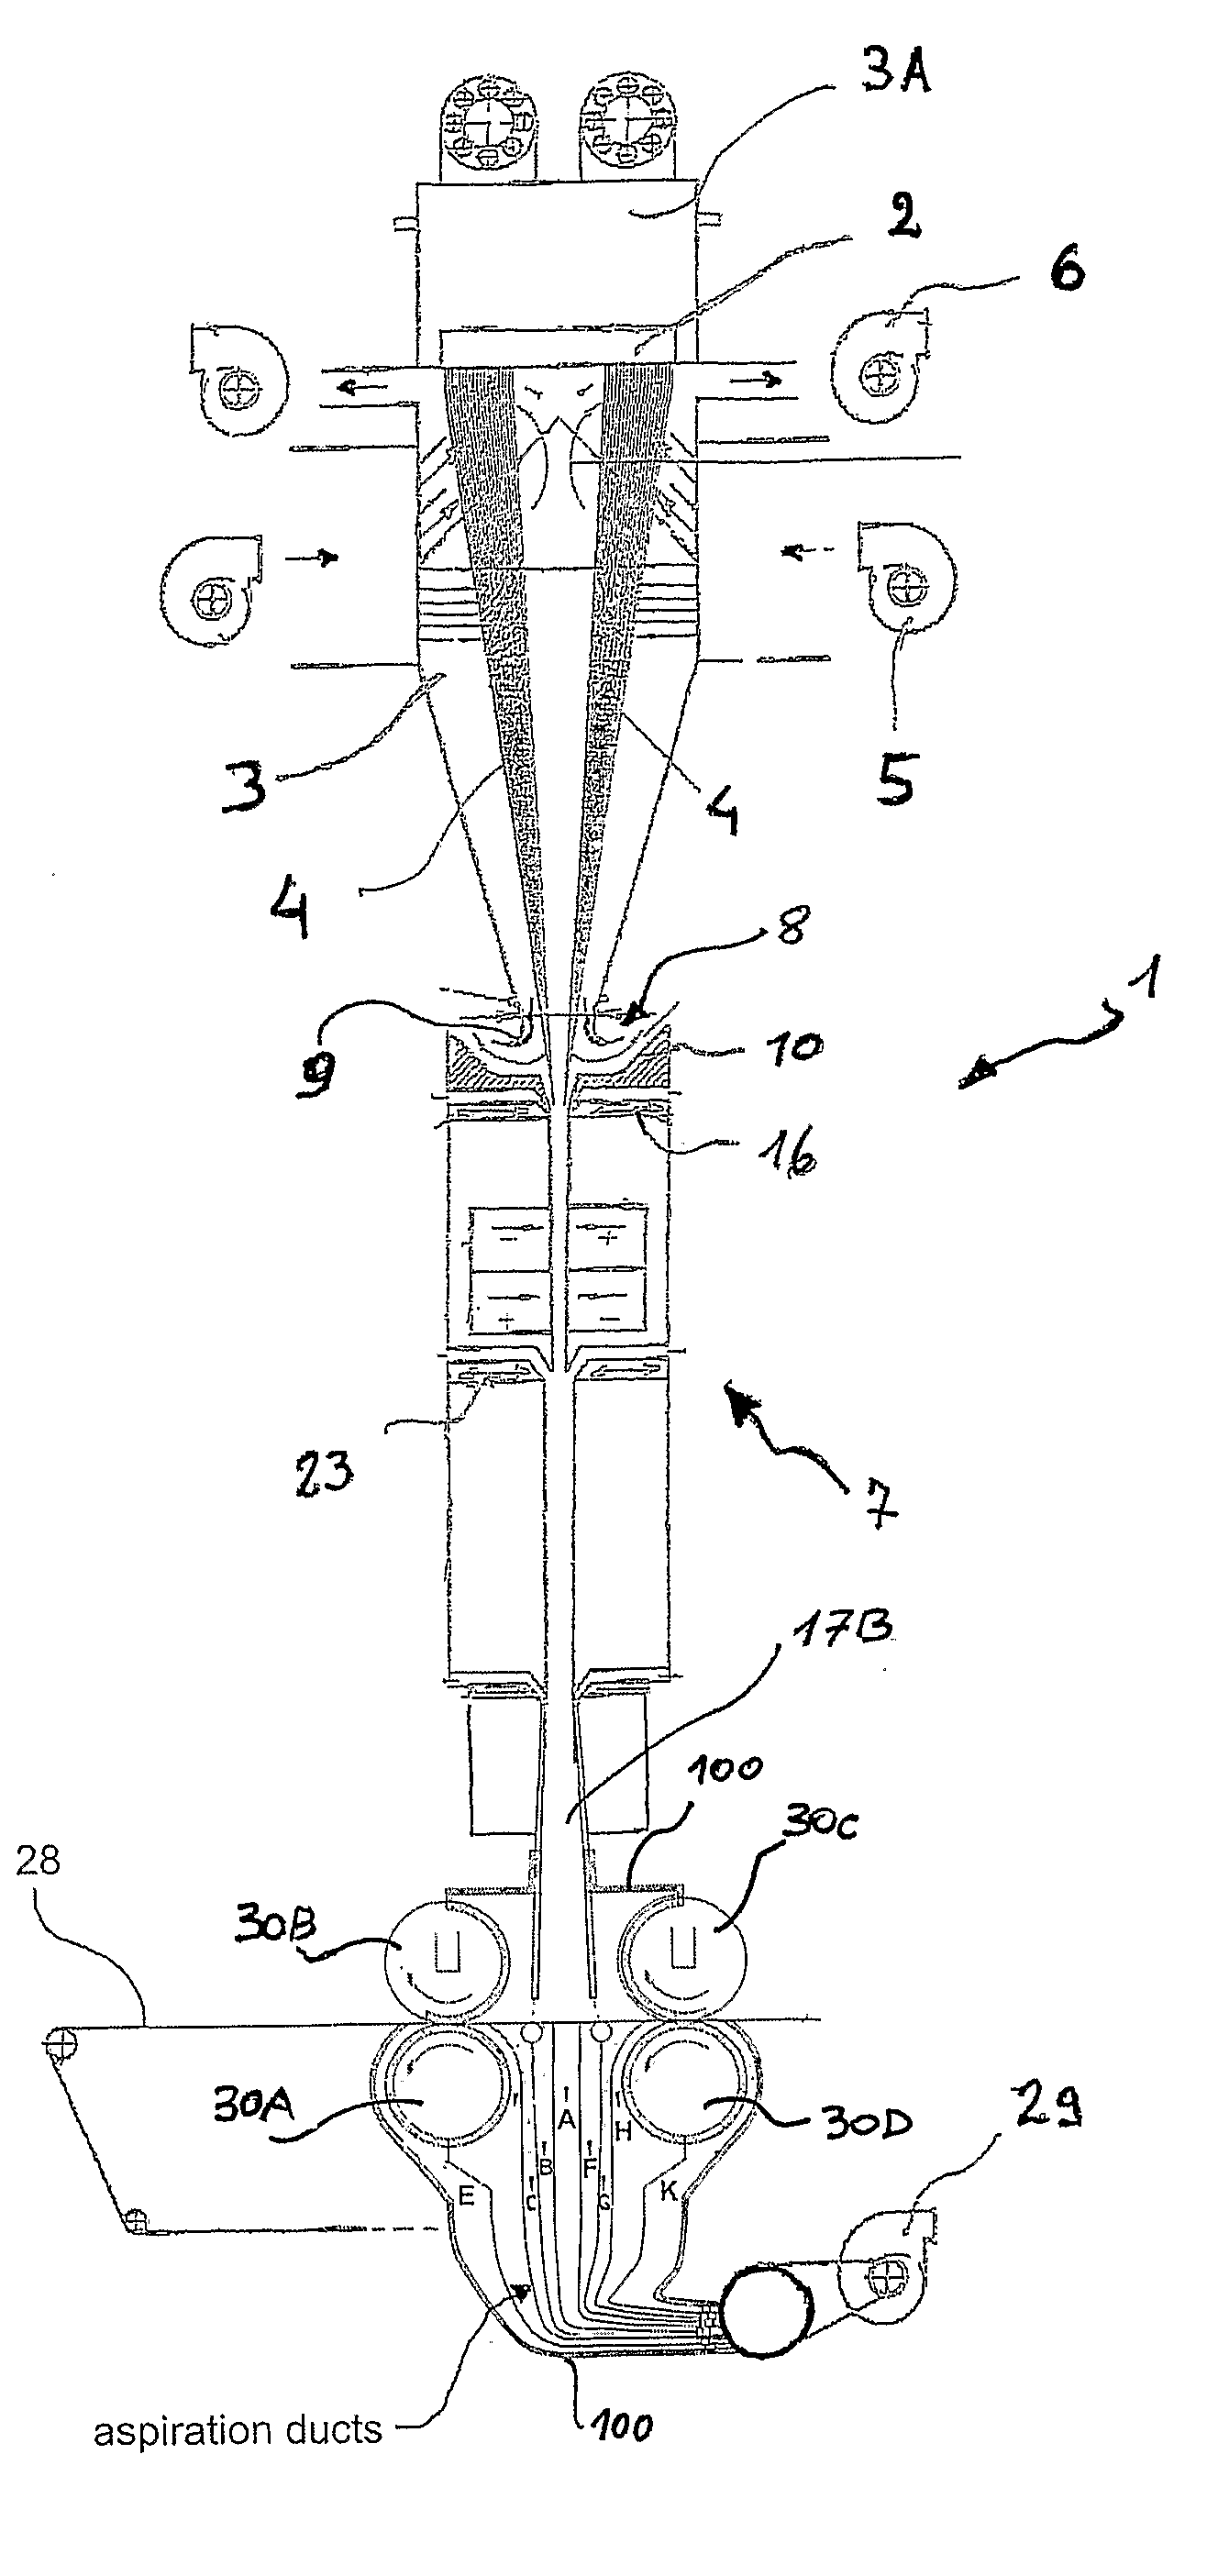 Apparatus and process for the production of a non-woven fabric